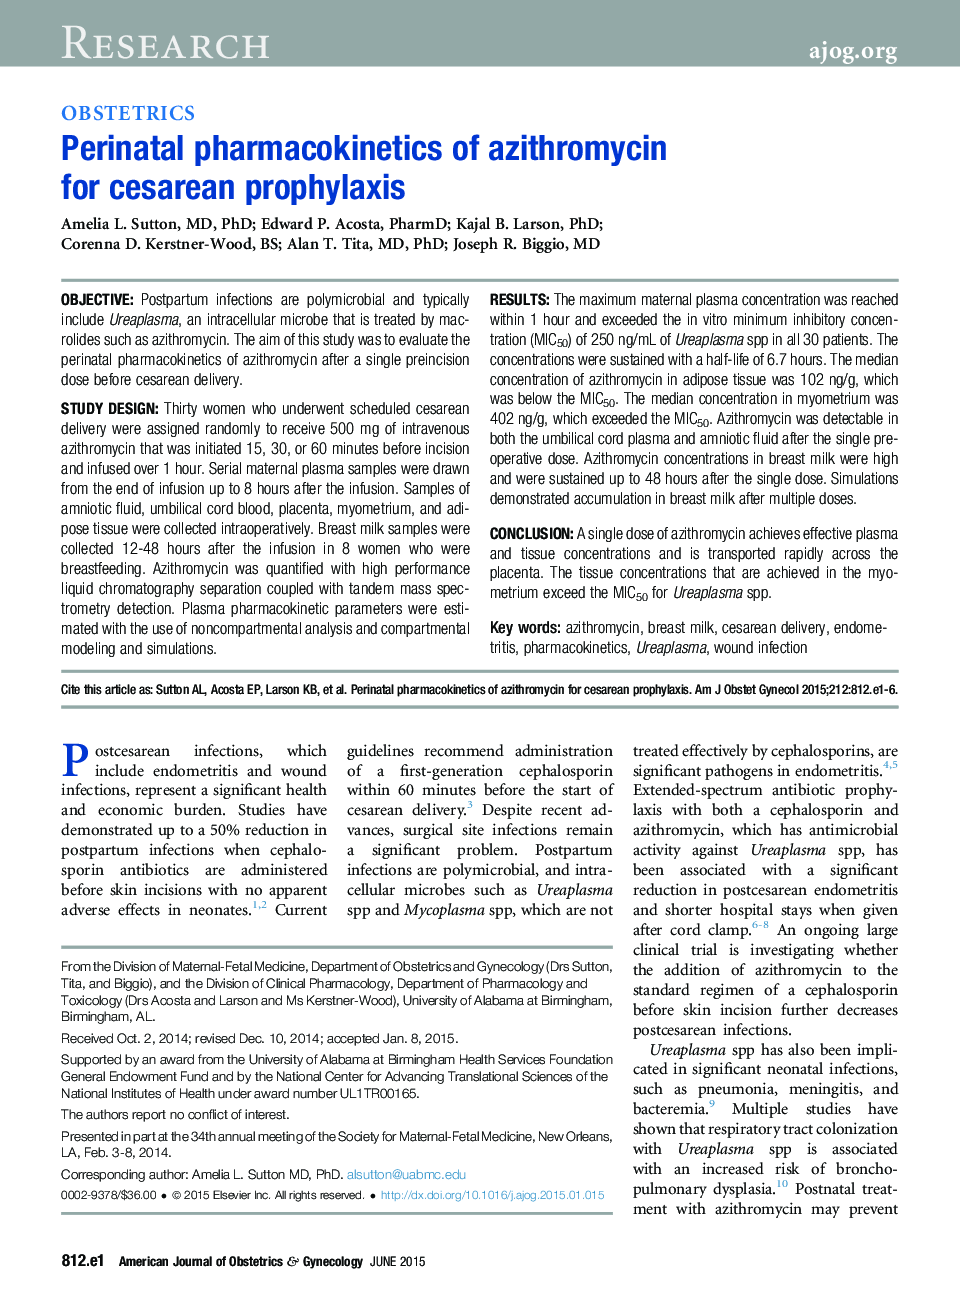 Perinatal pharmacokinetics of azithromycin for cesarean prophylaxis